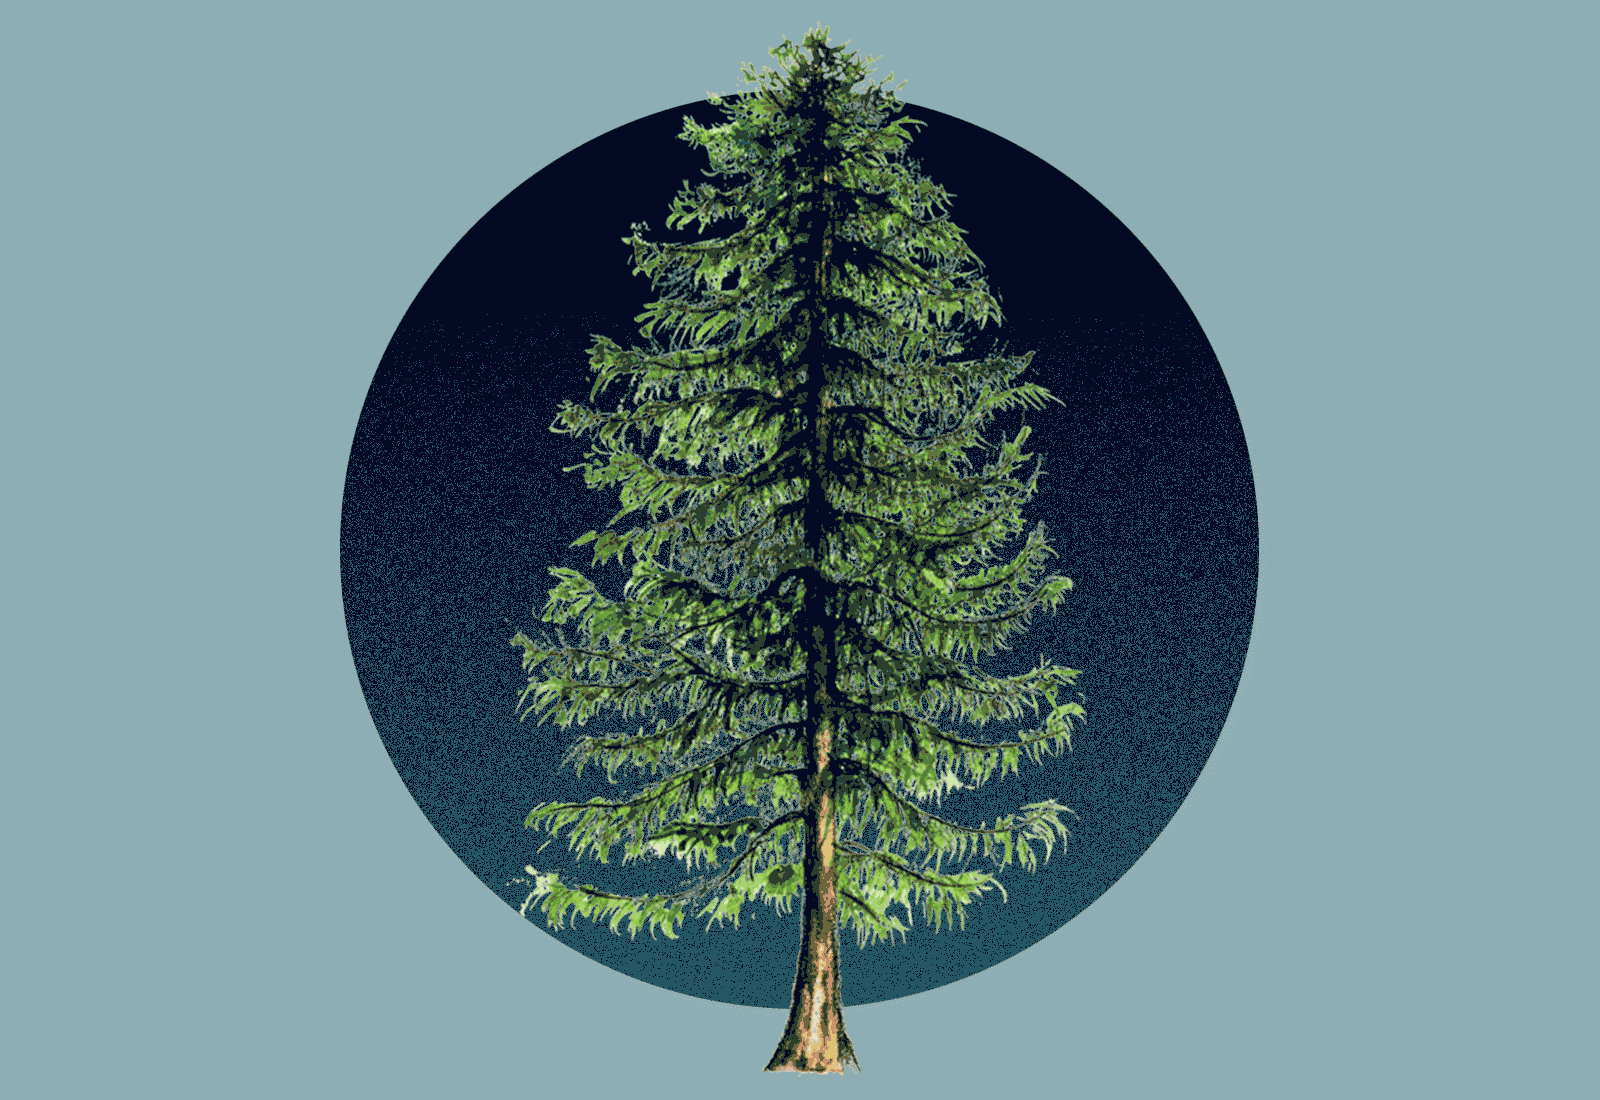 The Northeast'S Hemlock Trees Face Extinction. A Tiny Fly Could